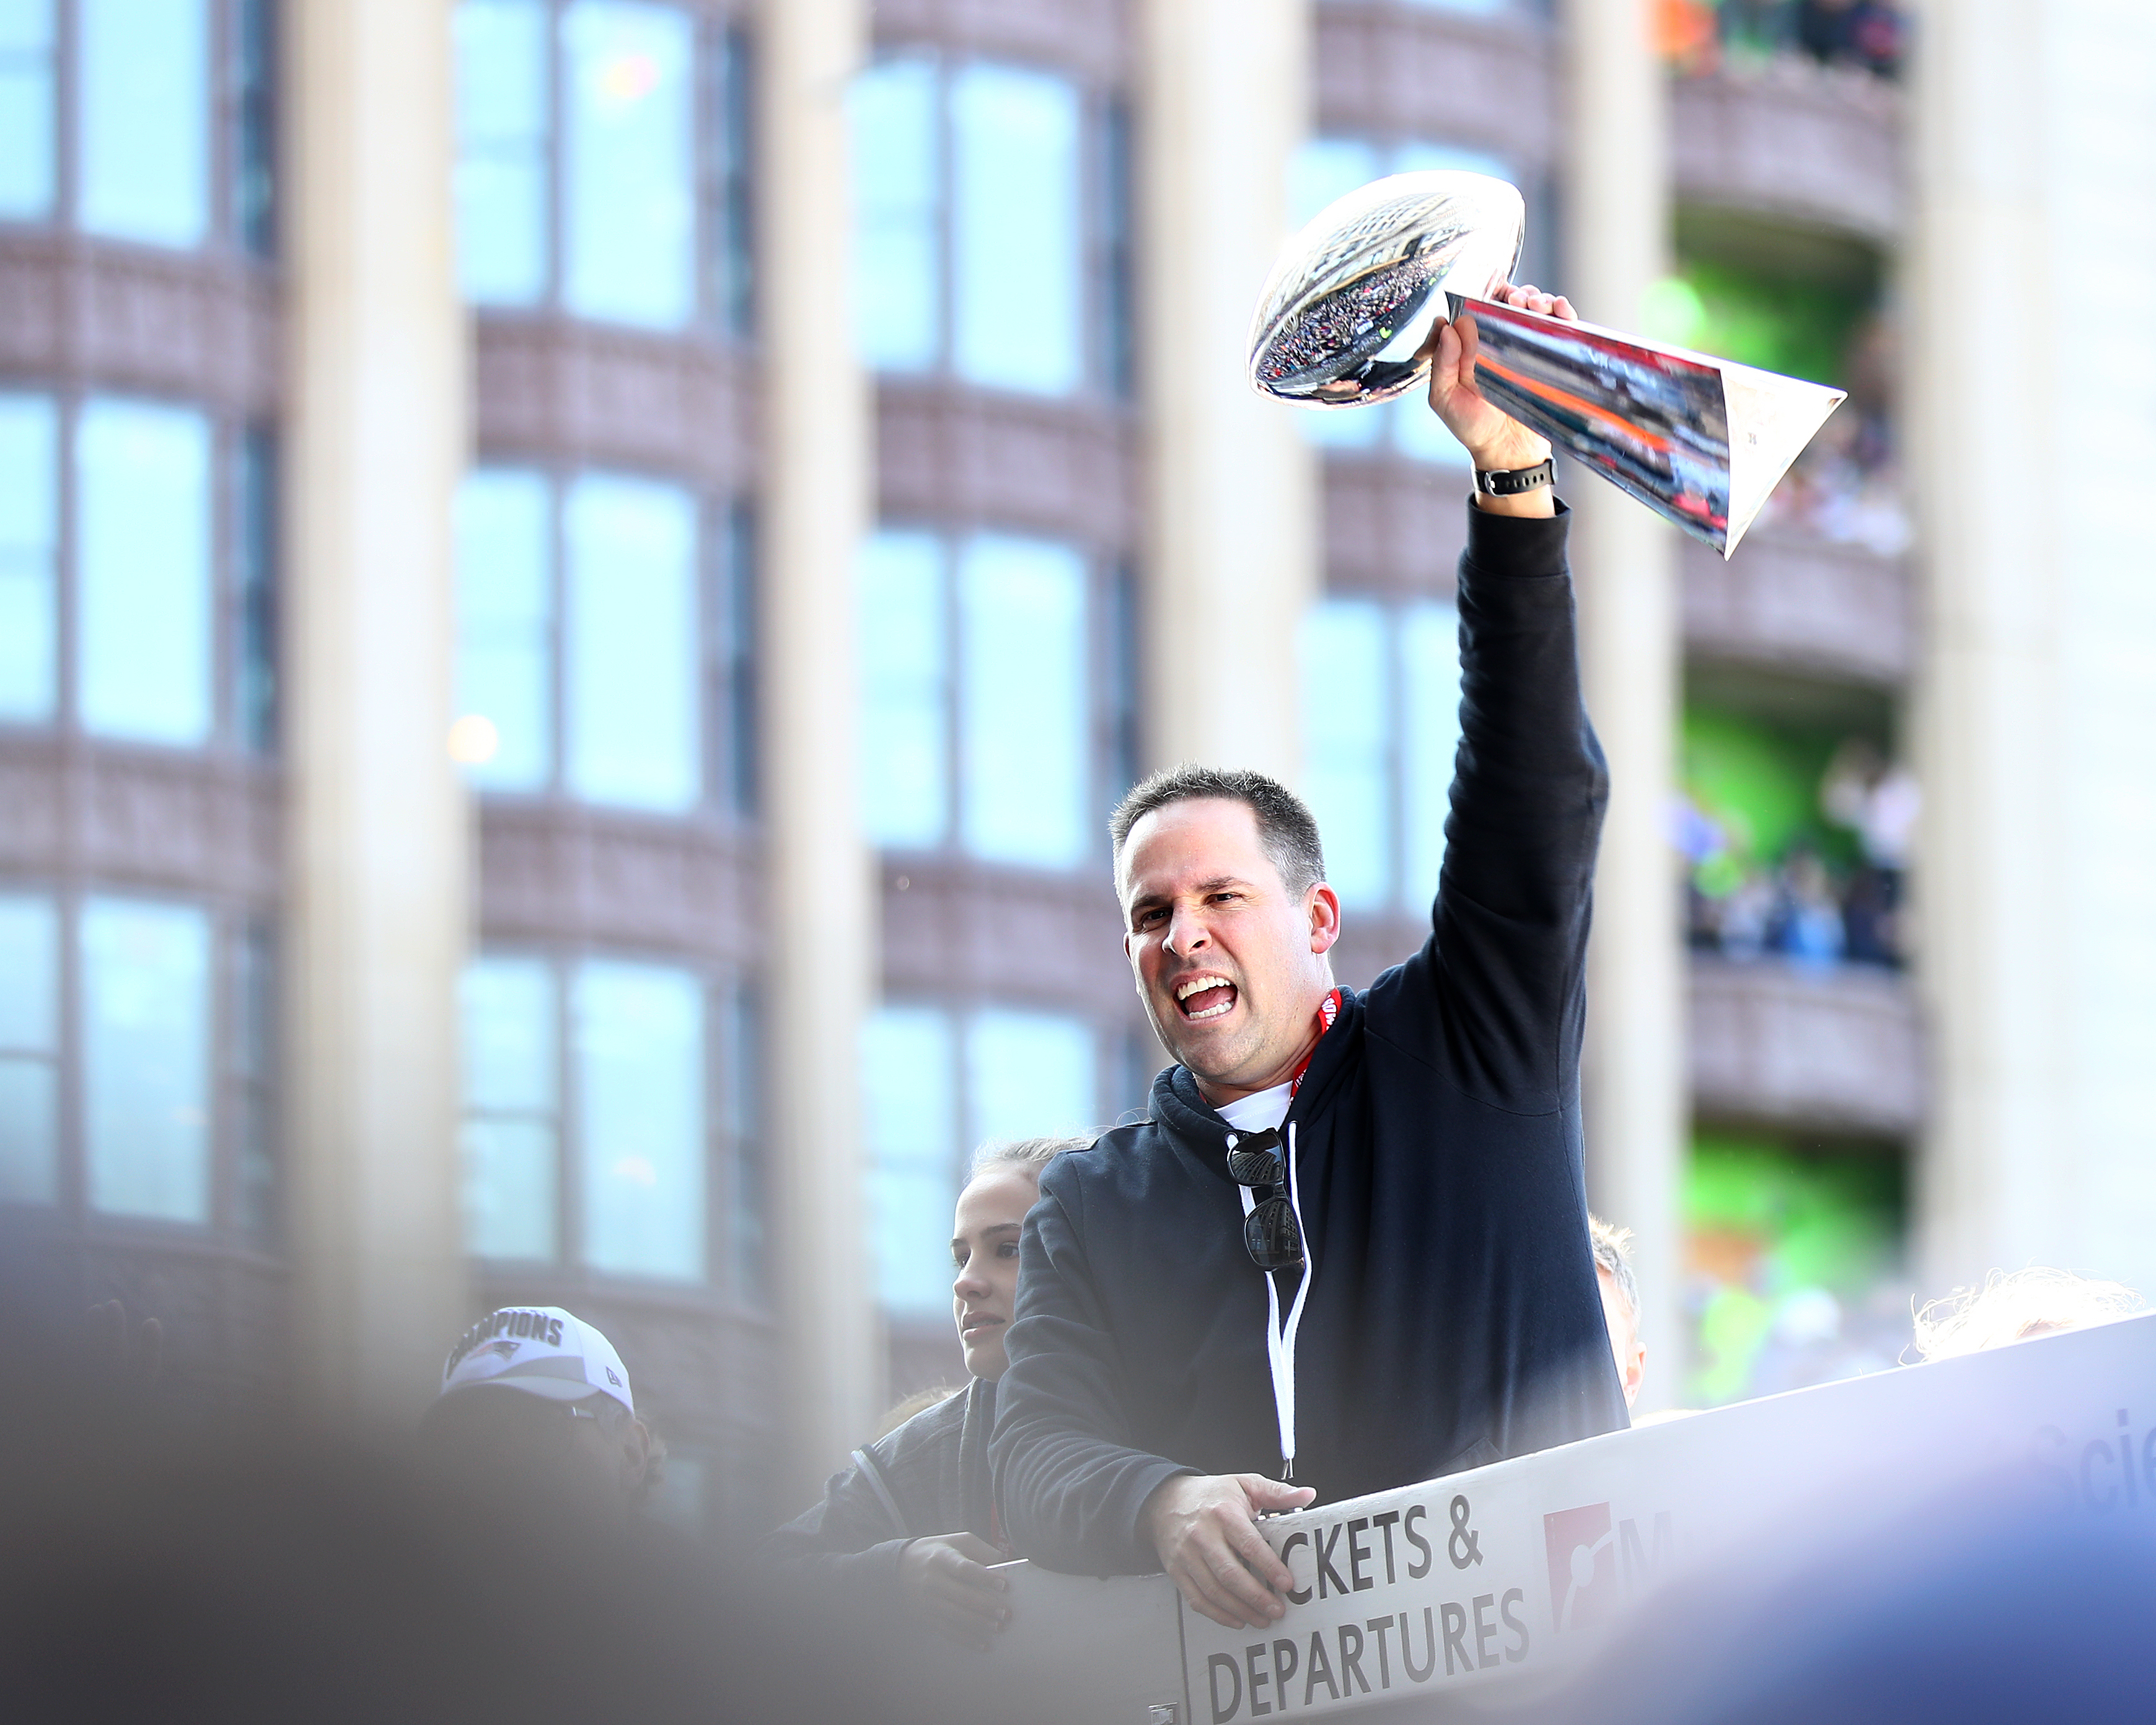 Josh McDaniels has agreed to become head coach of the Las Vegas Raiders